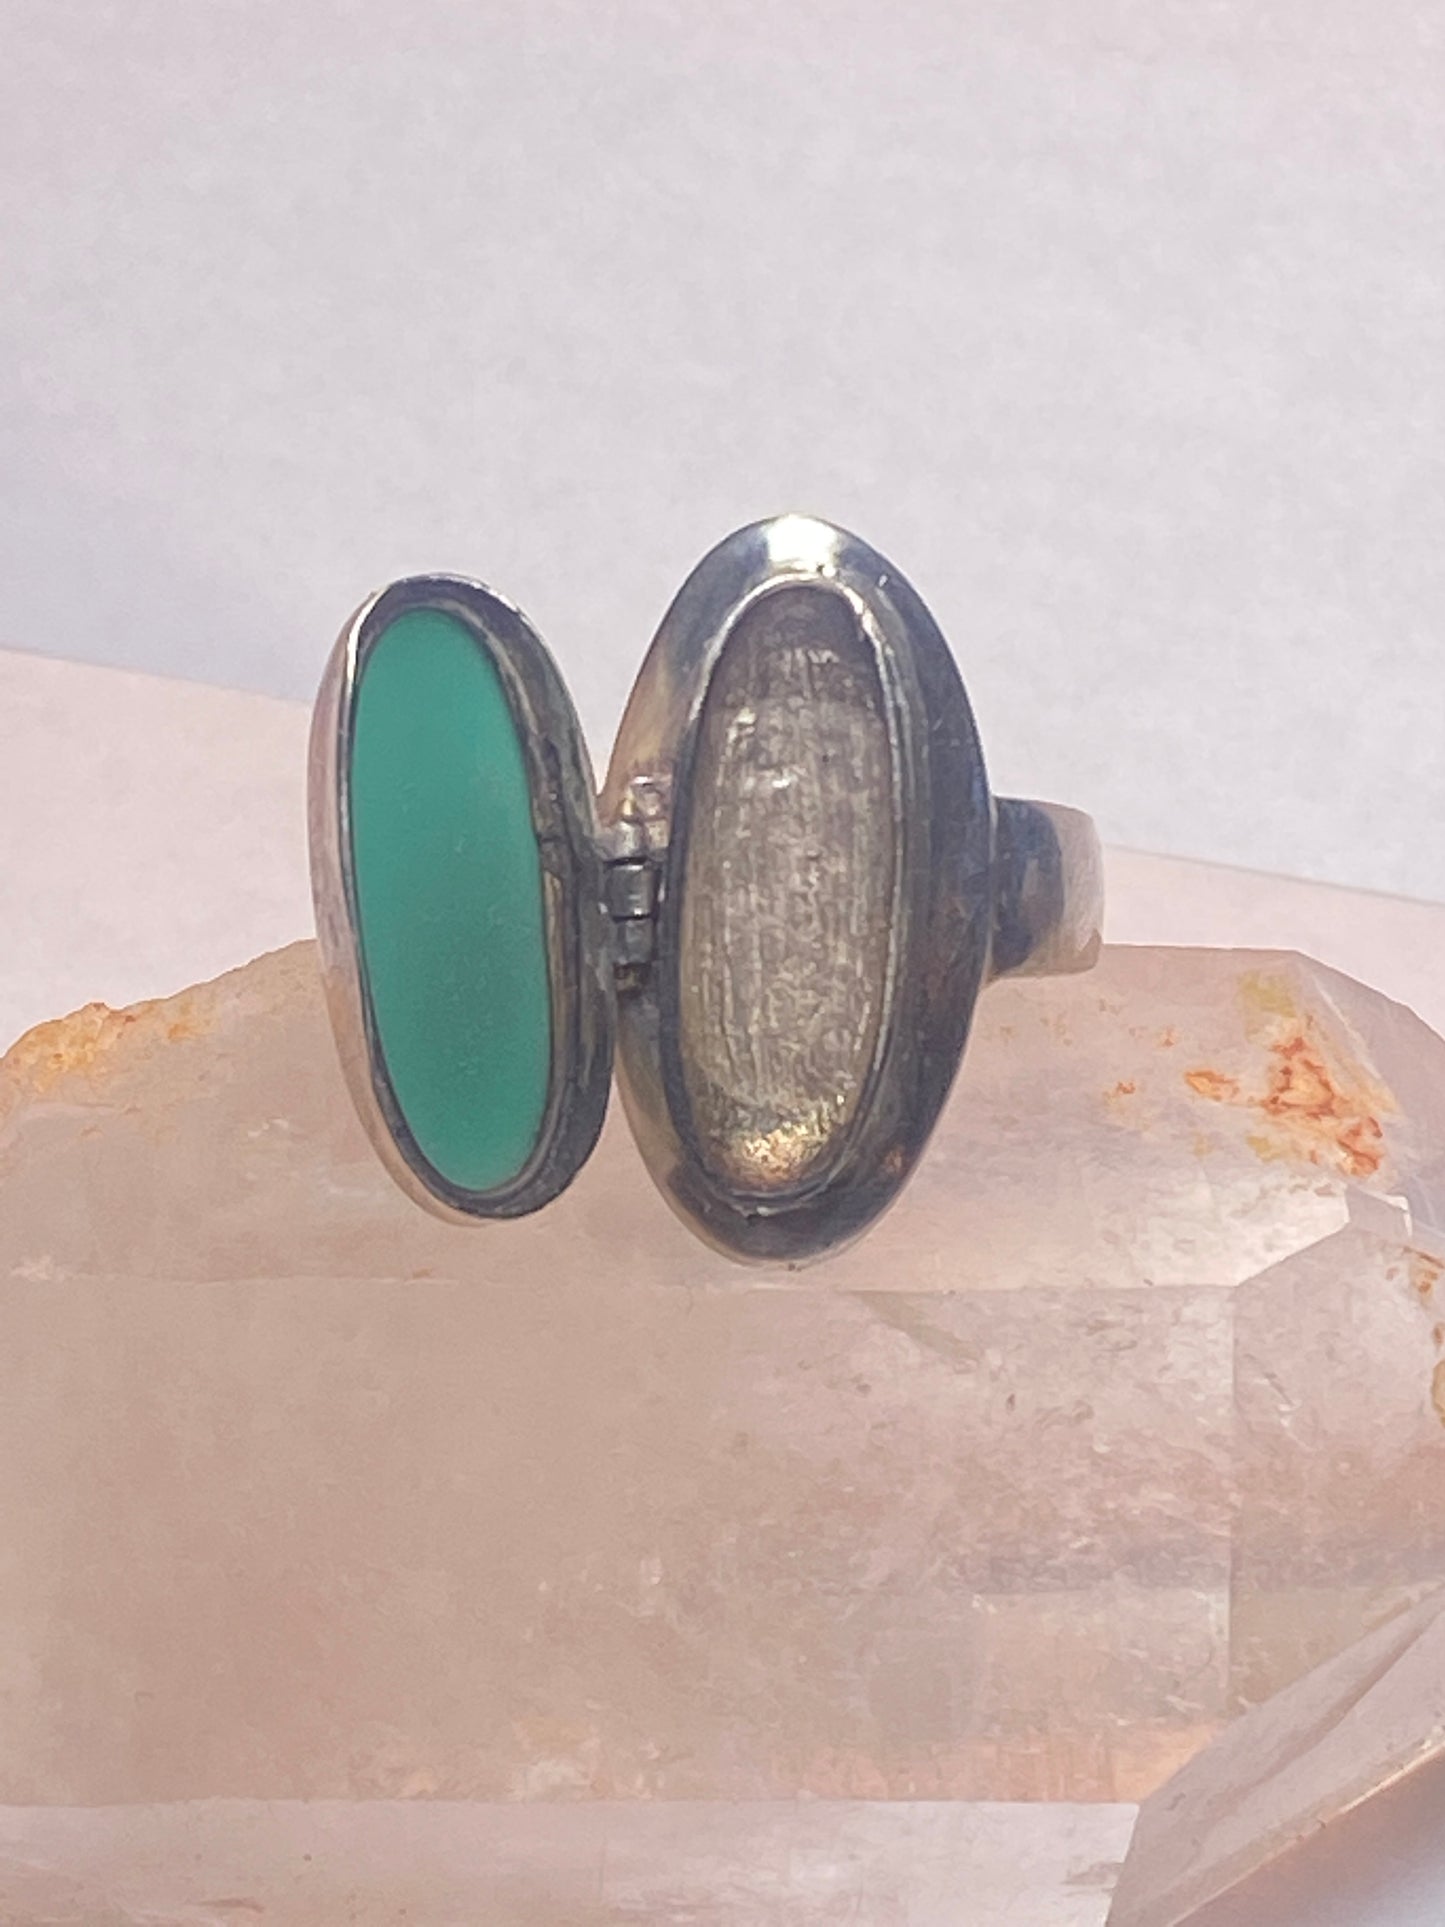 Poison ring size 10 green long sterling silver women